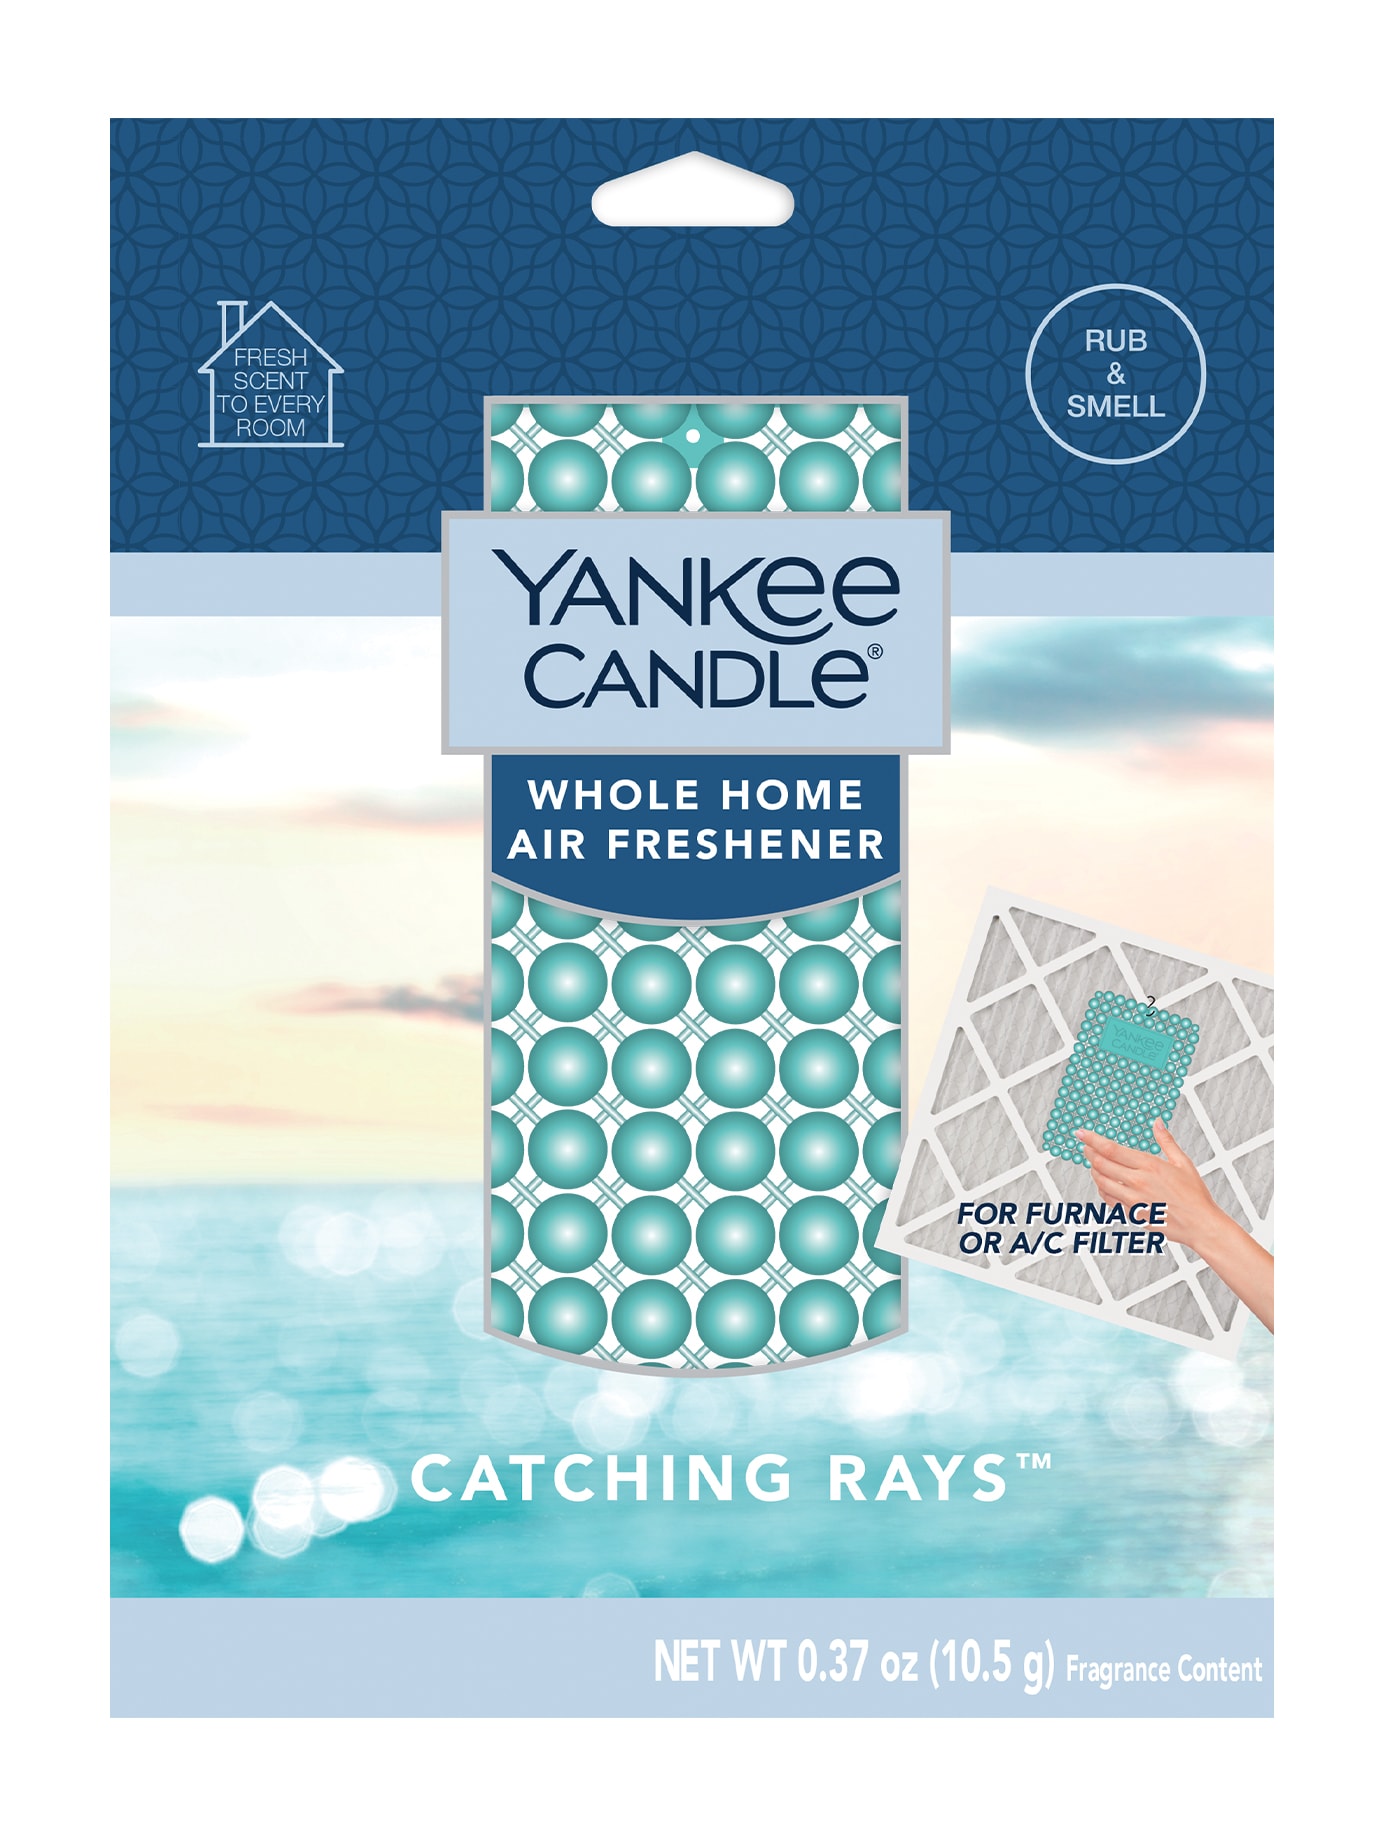 Catching Rays Yankee Candle Whole Home Air Freshener (4 Pack)